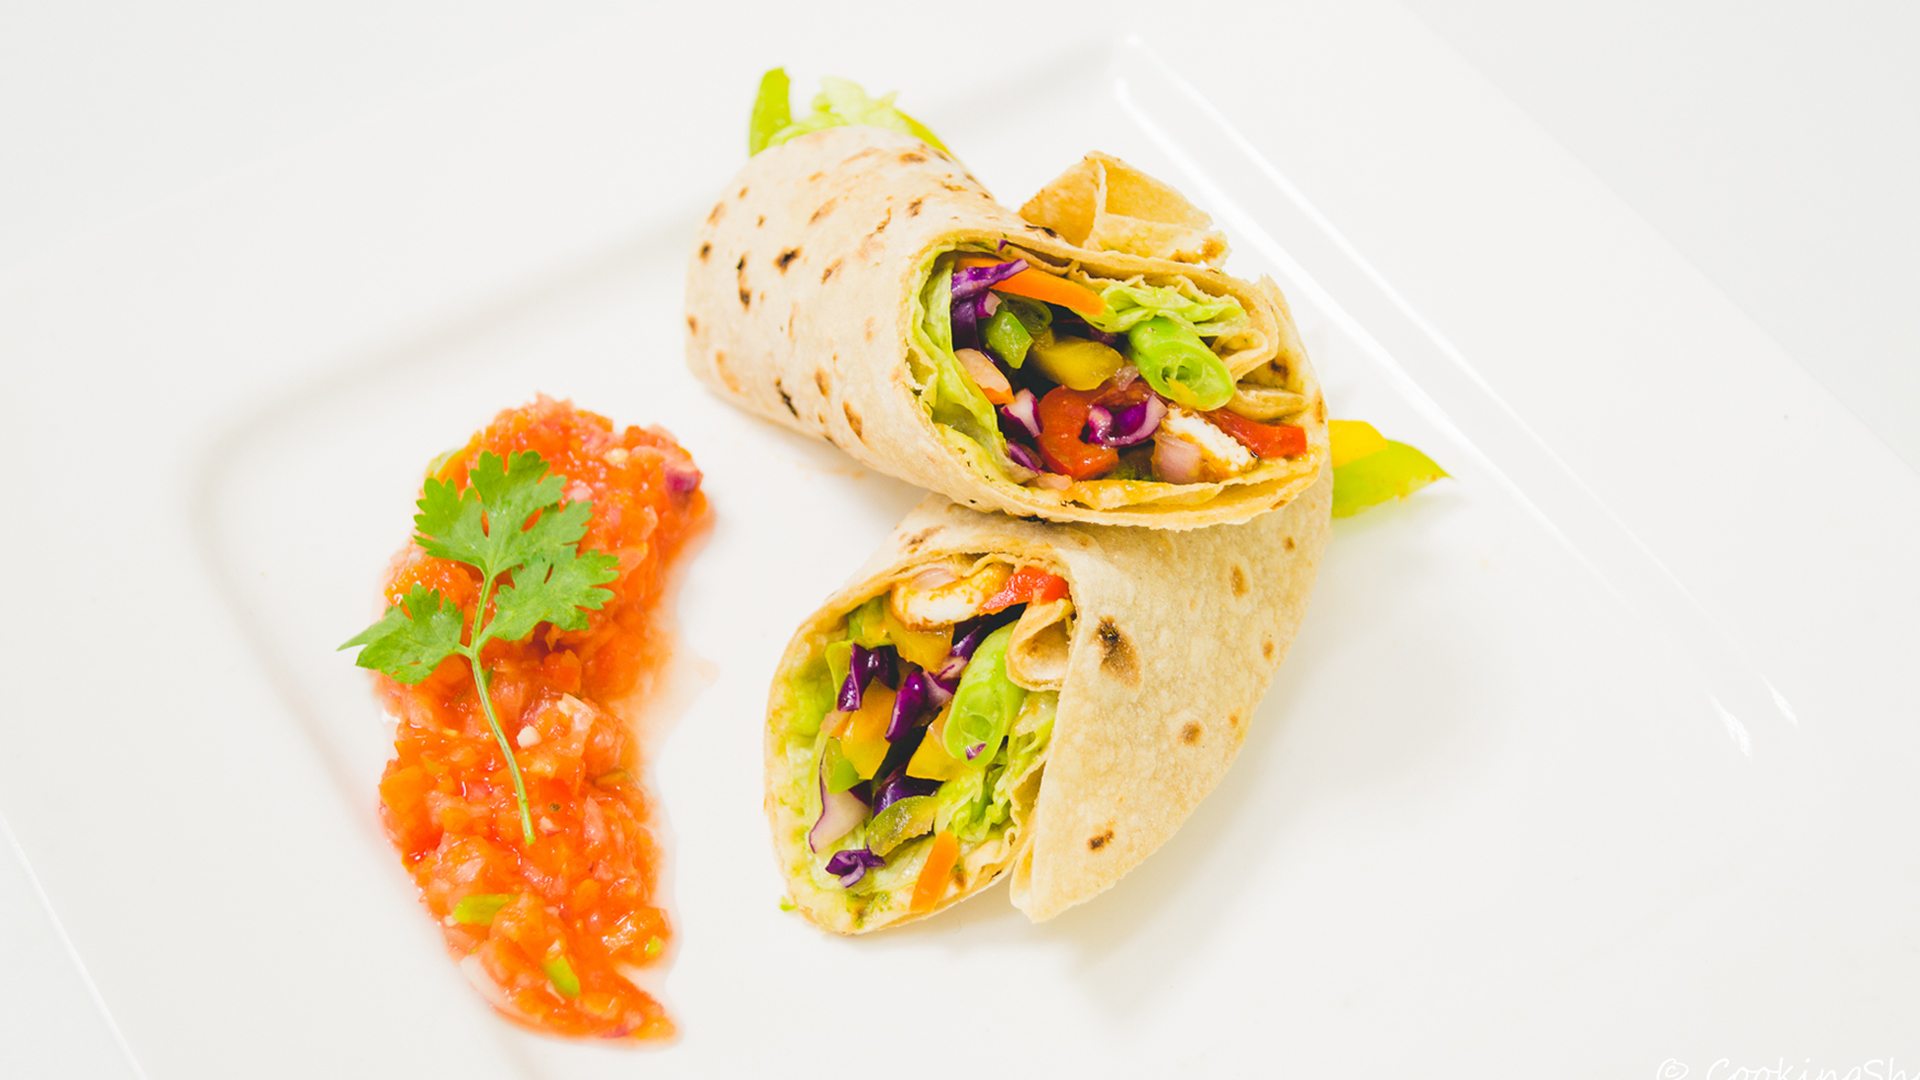 Vegetable Wrap Recipe - Using Leftover Rotis - Easy, Healthy Kids Lunch Box Recipes